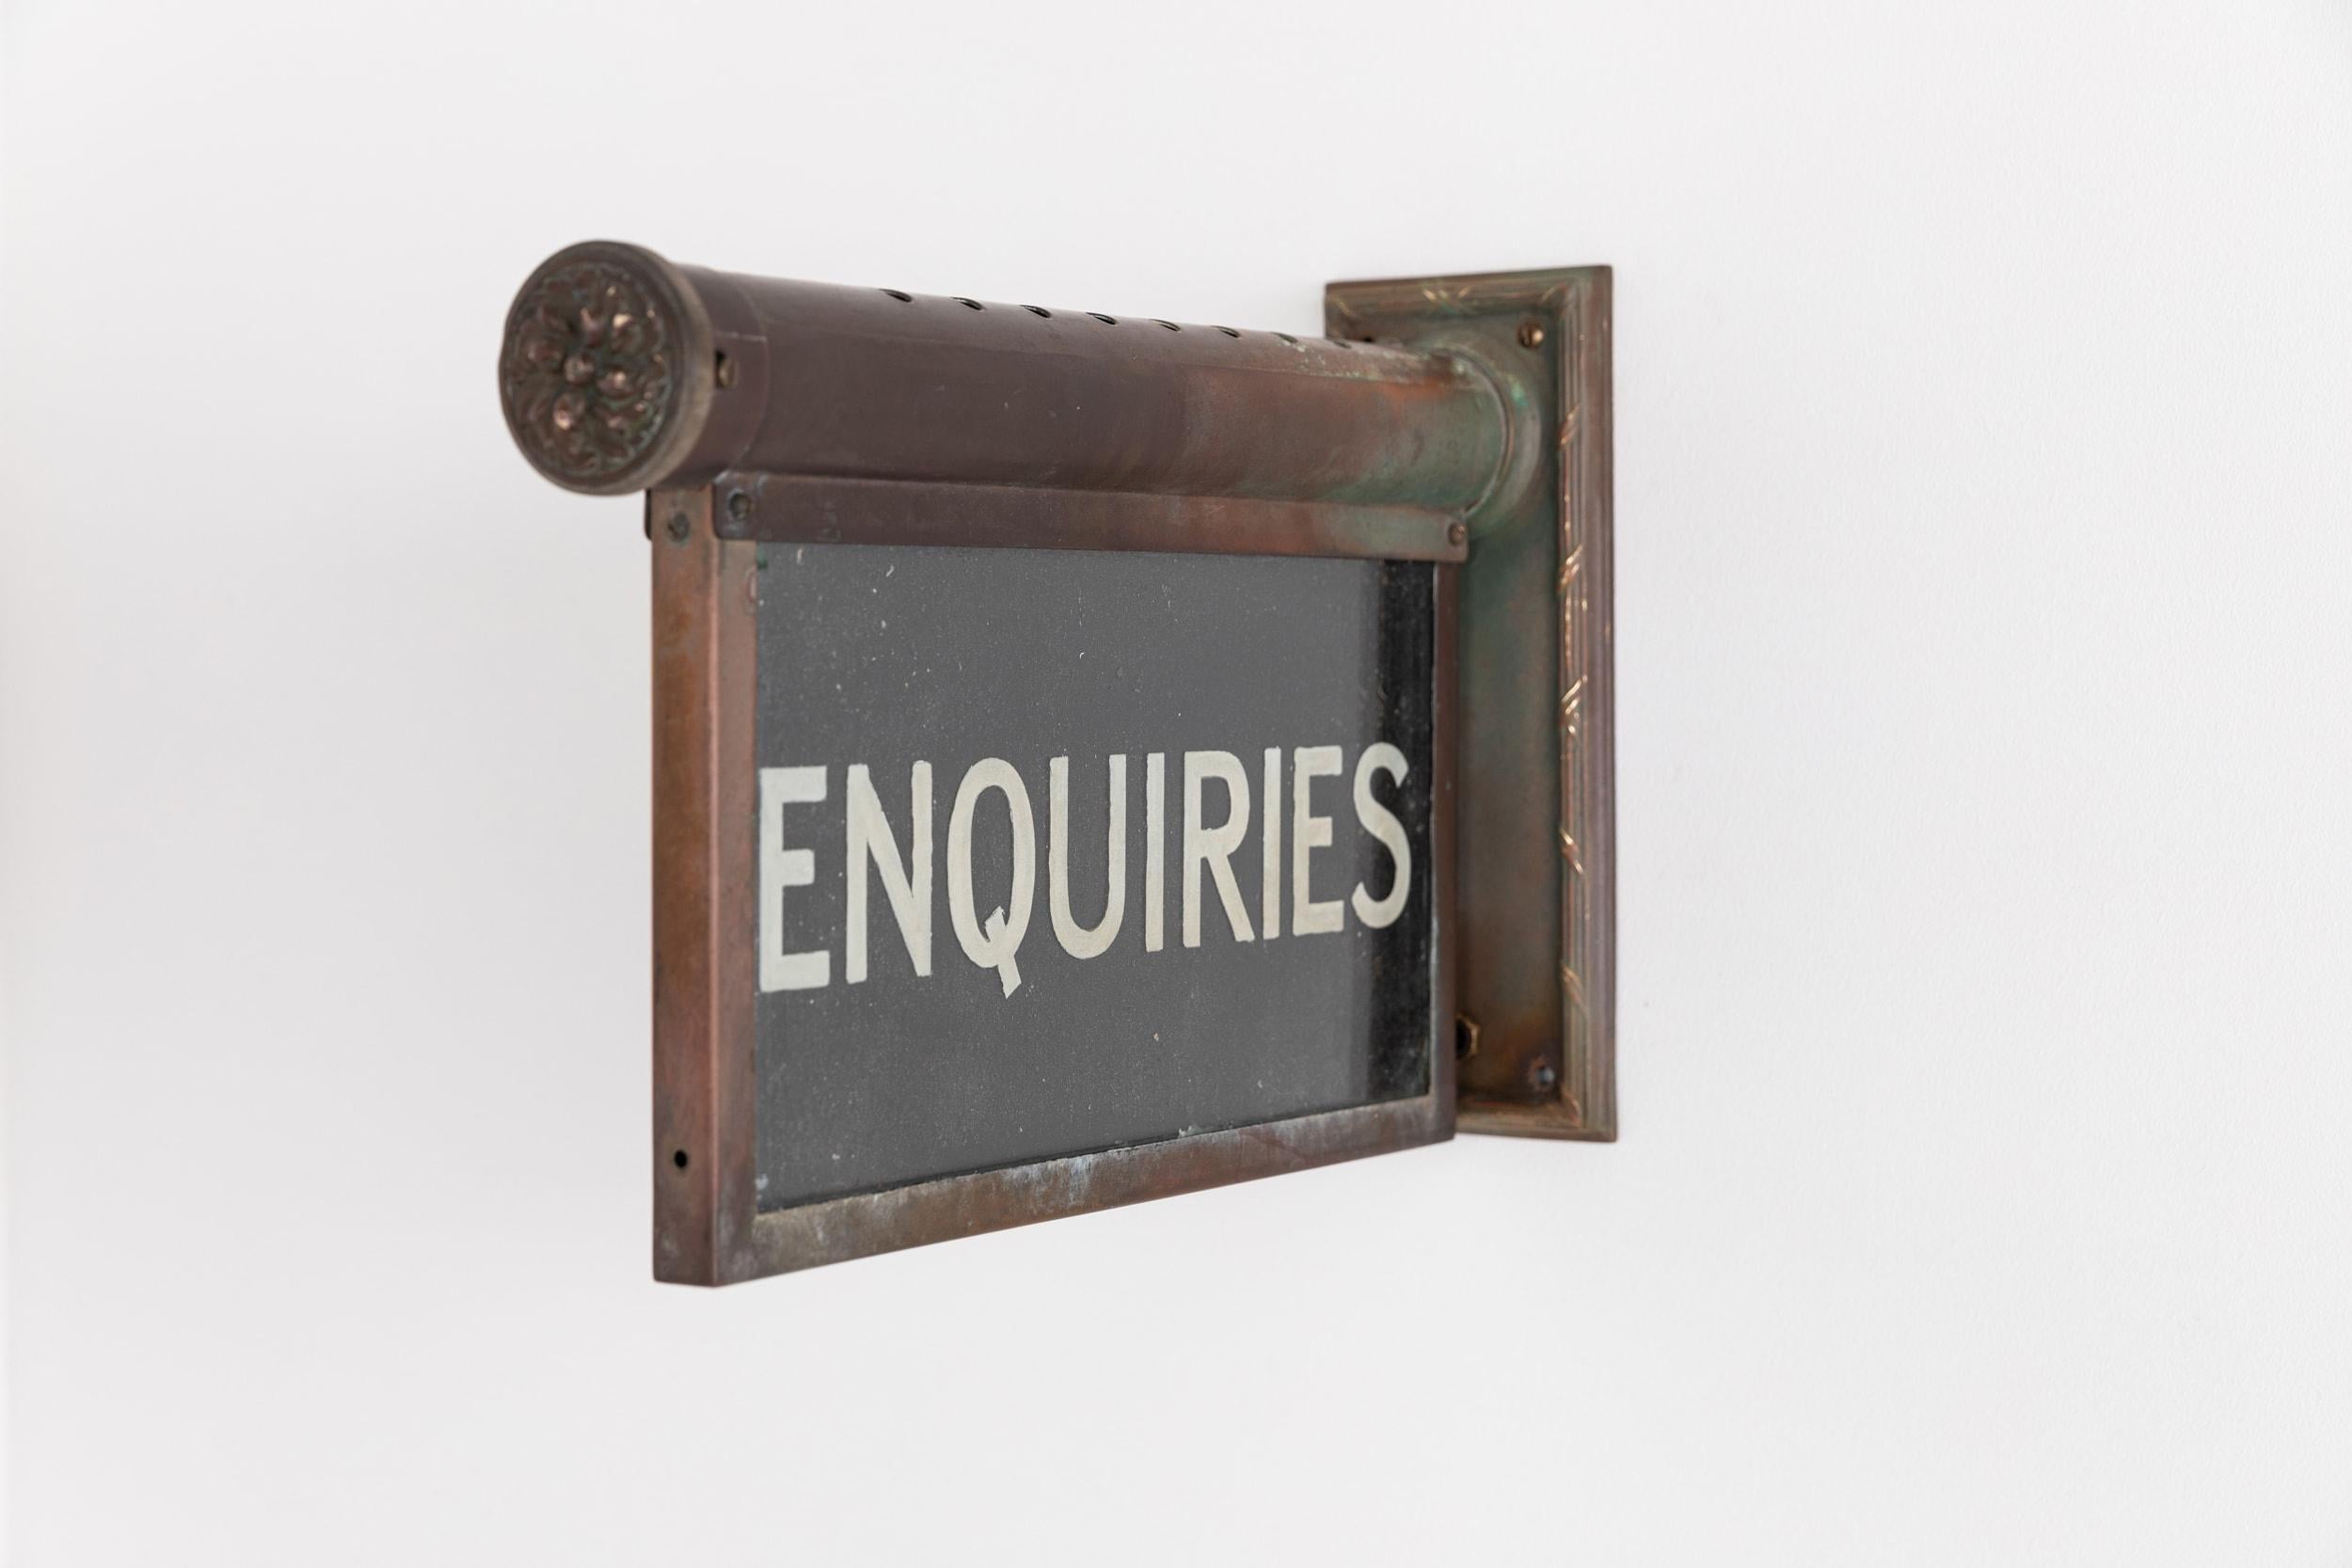 

A stunning illuminated 'Internalite' directional sign made in England by K.F.M Engineering. c.1920.

Wall mounted brass frame housing the internal illuminations above single sided polished plate glass etched with 'Enquries'. Frame stamped with